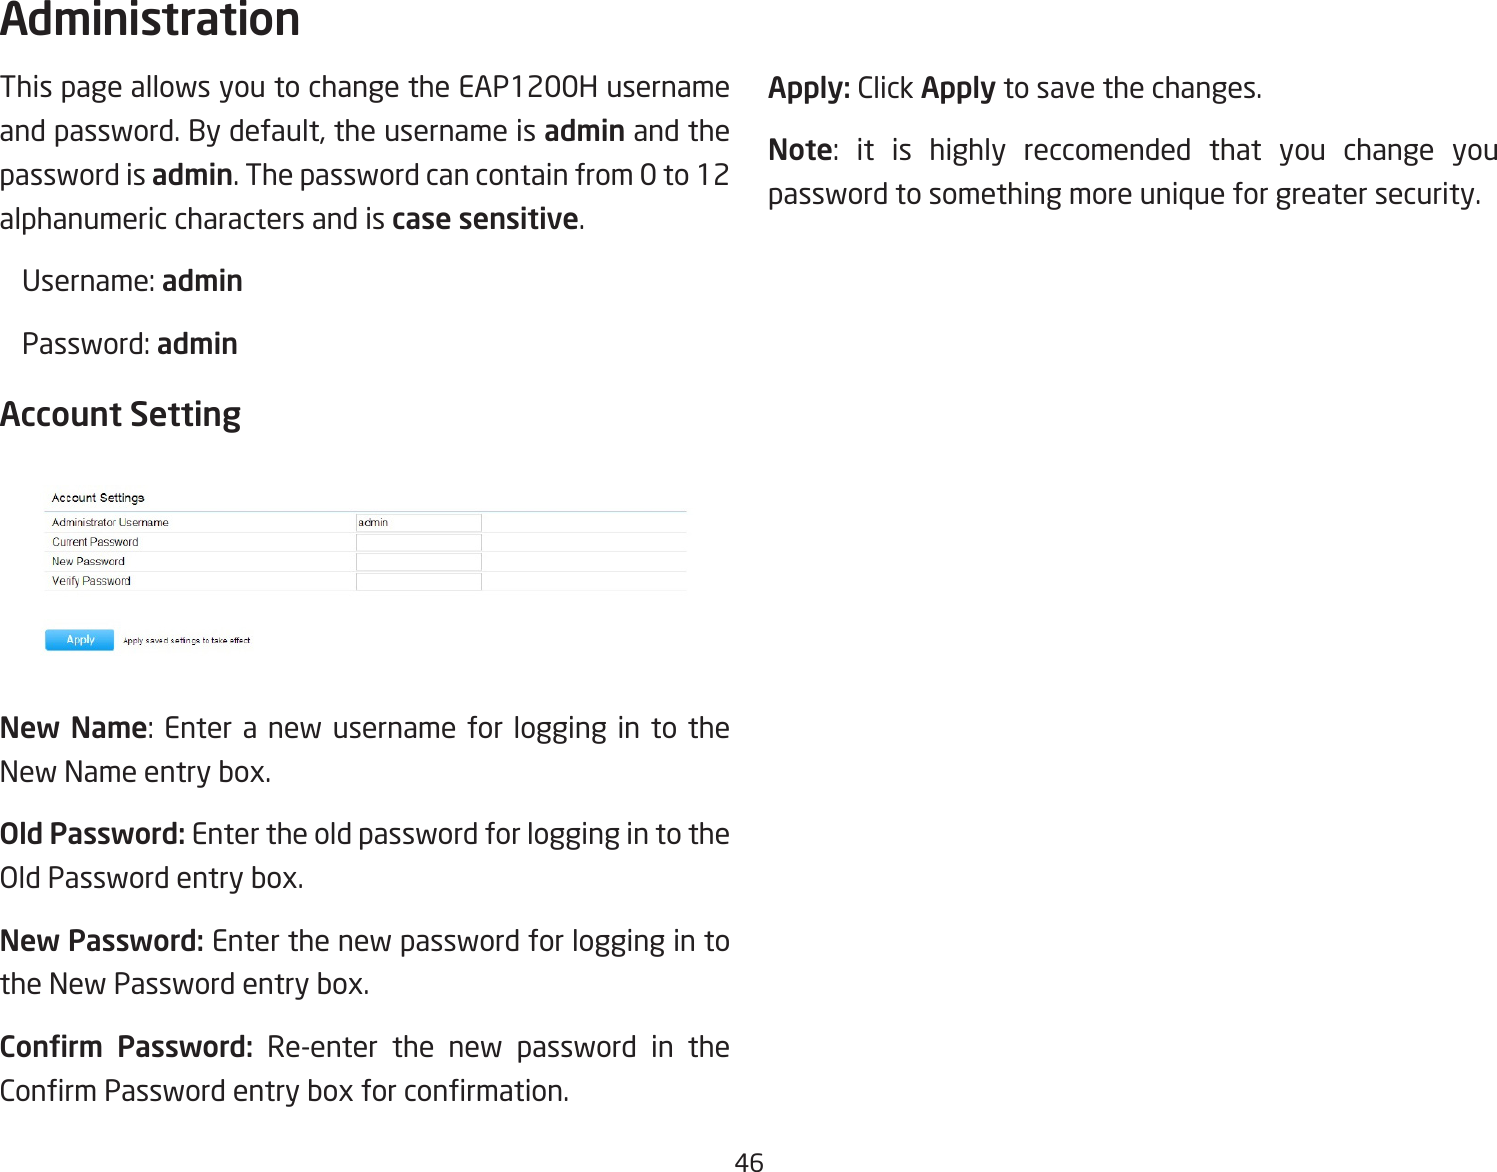 46This page allows you to change the EAP1200H username andpassword.Bydefault,theusernameisadmin and the password is admin. The password can contain from 0 to 12 alphanumeric characters and is case sensitive. Username:admin Password:adminAccount SettingNew Name: Enter a new username for logging in to theNewNameentrybox.Old Password: Enter the old password for logging in to the OldPasswordentrybox.New Password: Enter the new password for logging in to theNewPasswordentrybox.Conrm  Password: Re-enter the new password in the ConrmPasswordentryboxforconrmation.Apply: Click Apply to save the changes.Note: it is highly reccomended that you change youpassword to something more unique for greater security.Administration